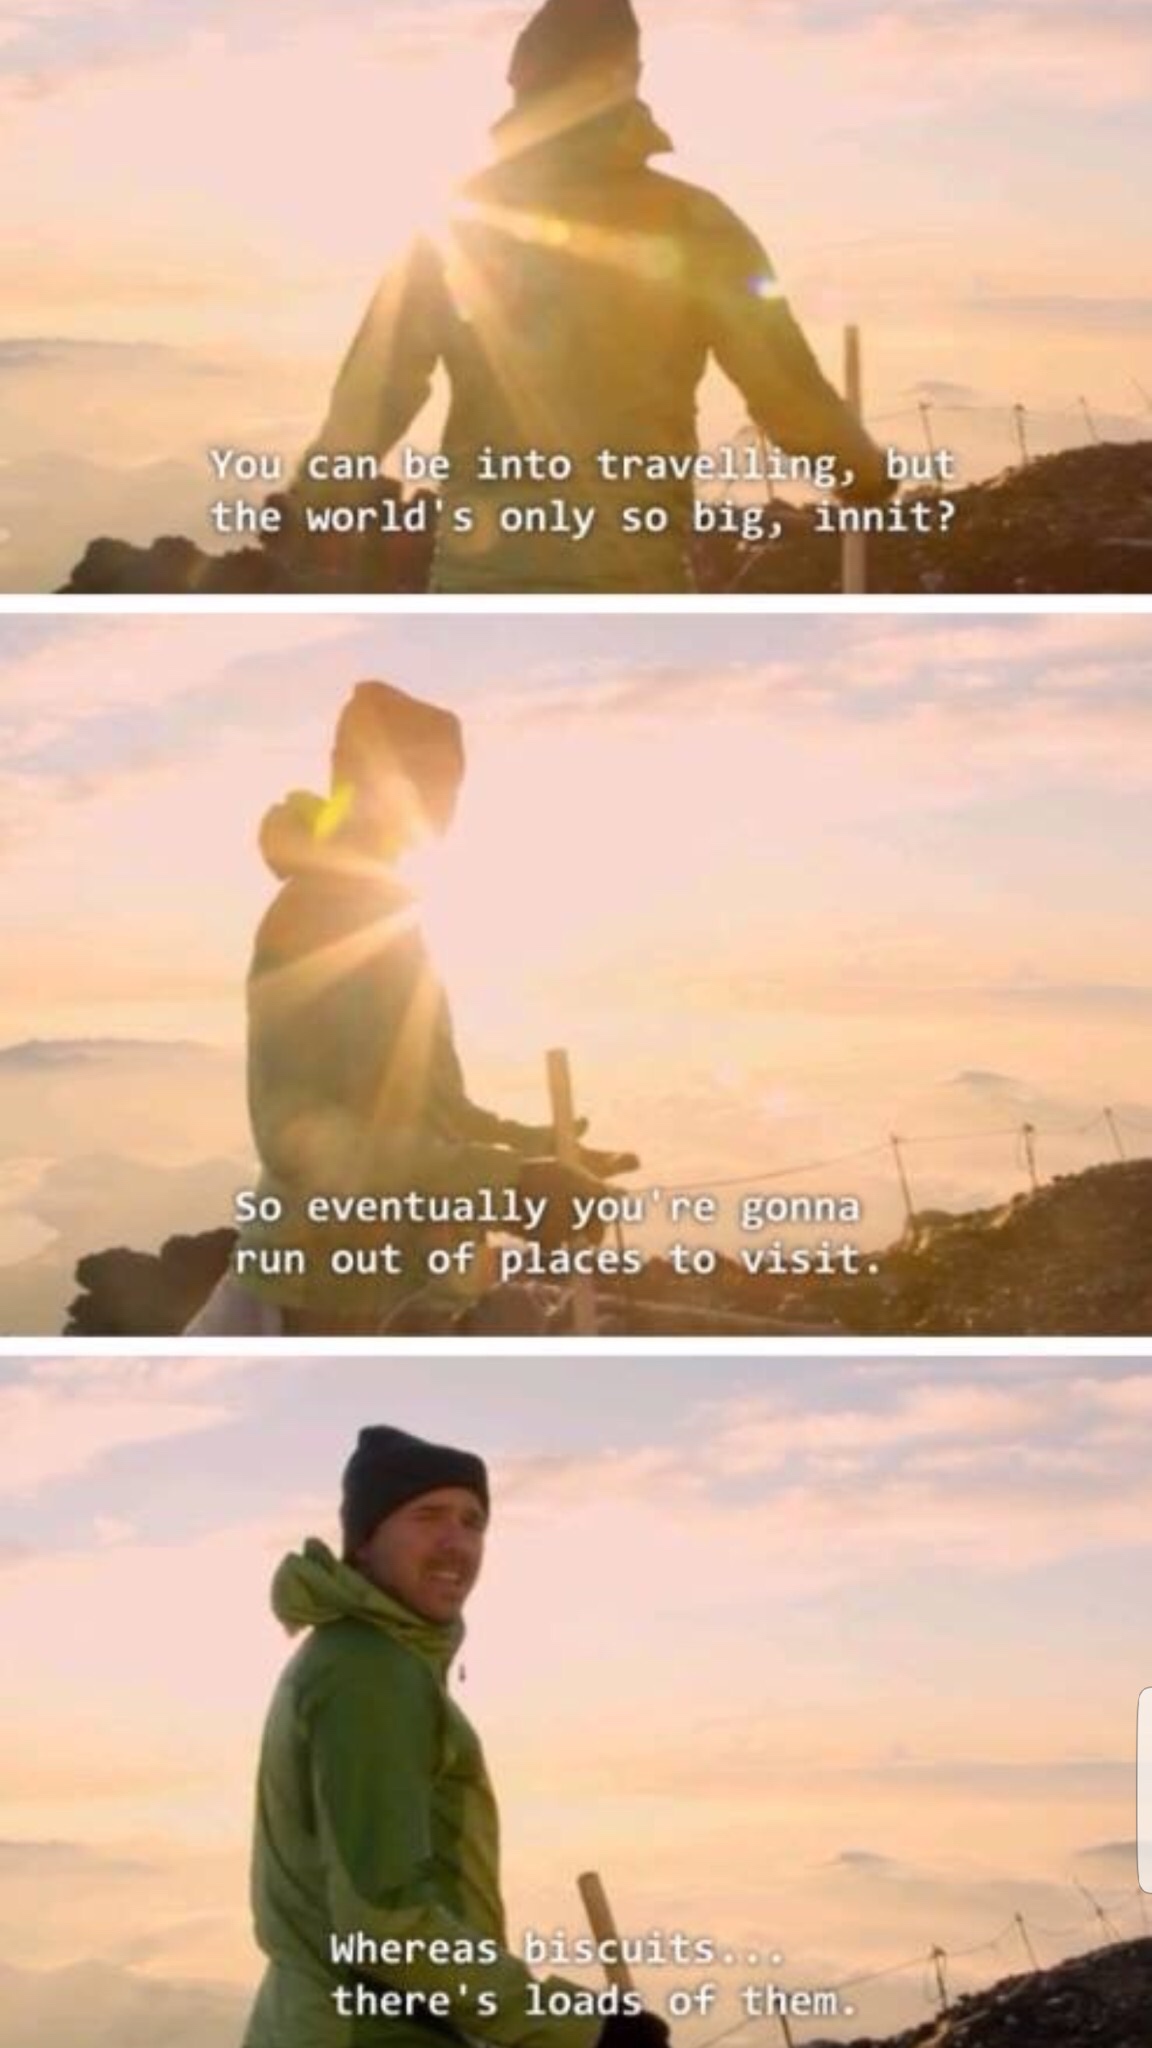 showerthoughts   - karl pilkington biscuit - You can be into travelling, but the world's only so big, innit? So eventually you're gonna run out of places to visit. Whereas biscuits... there's loads of them.